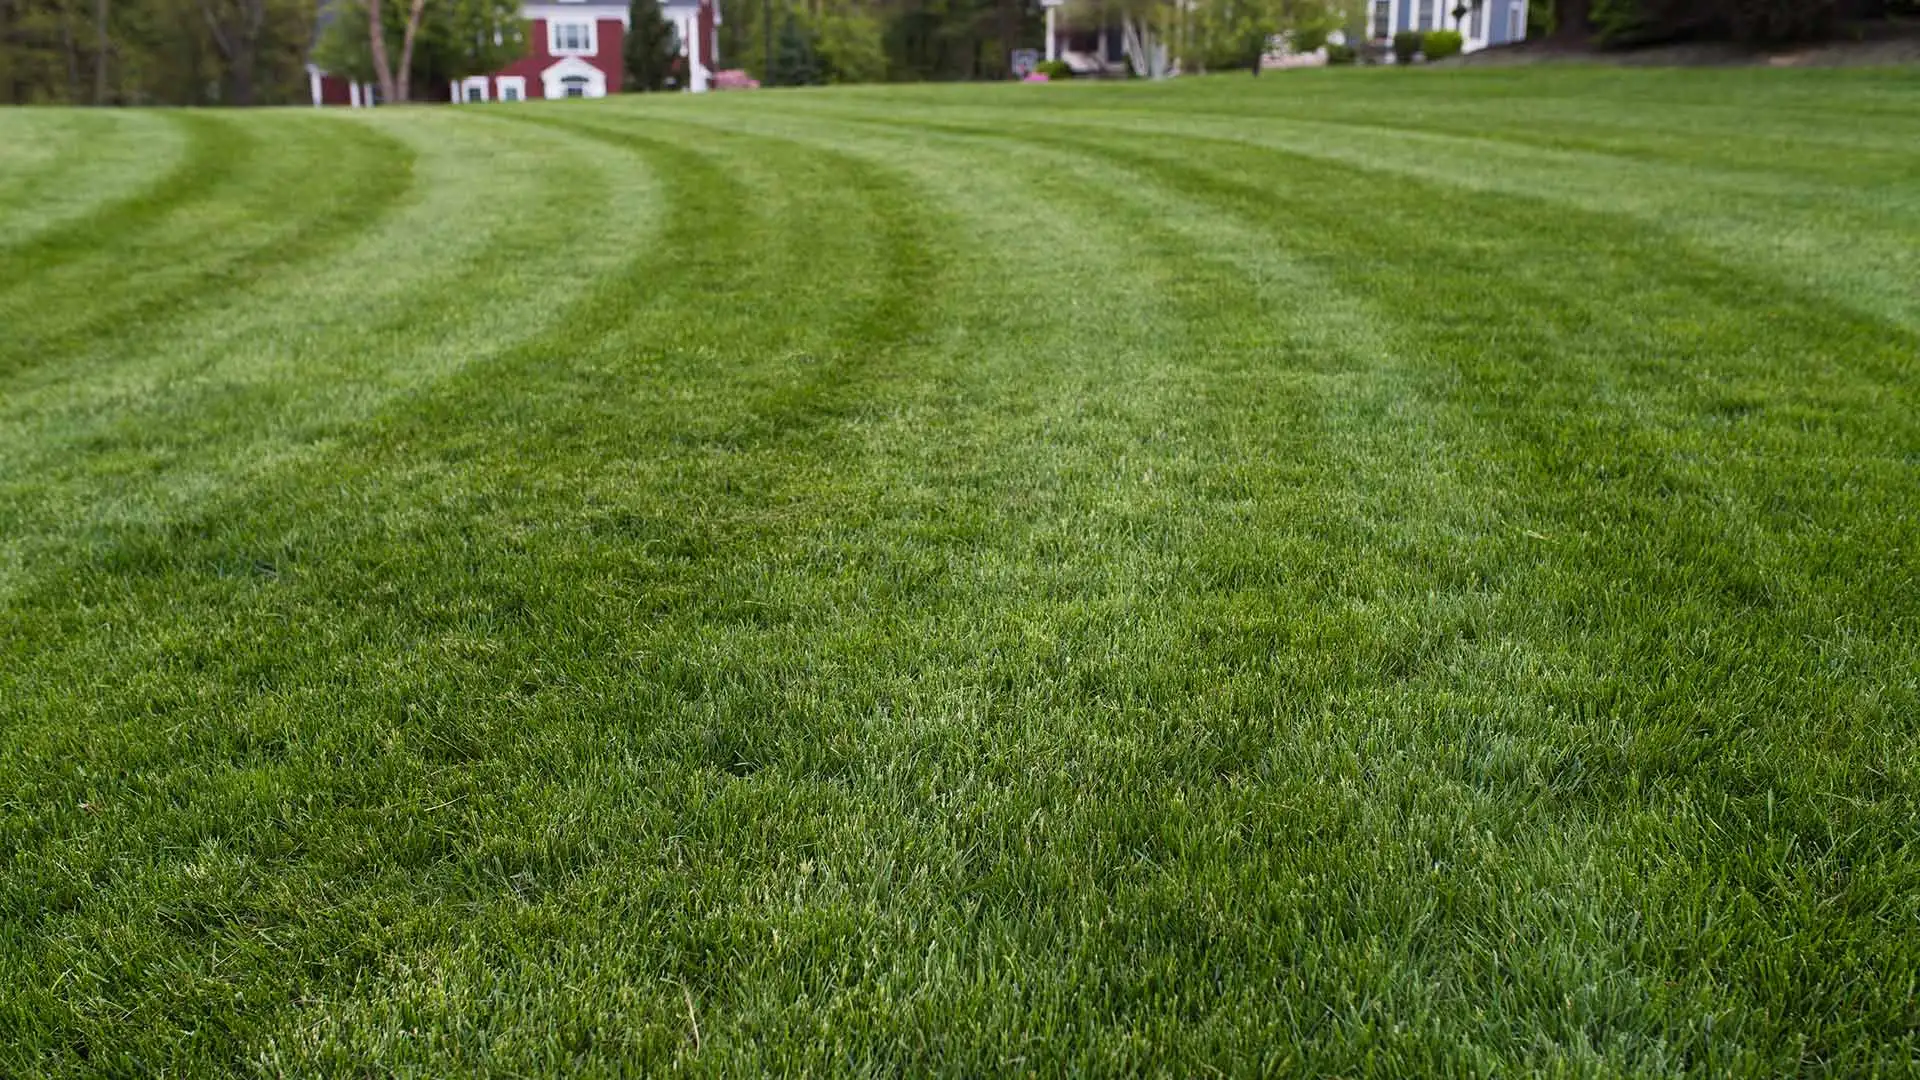 Lawn mowed for a client in Ankeny, IA.